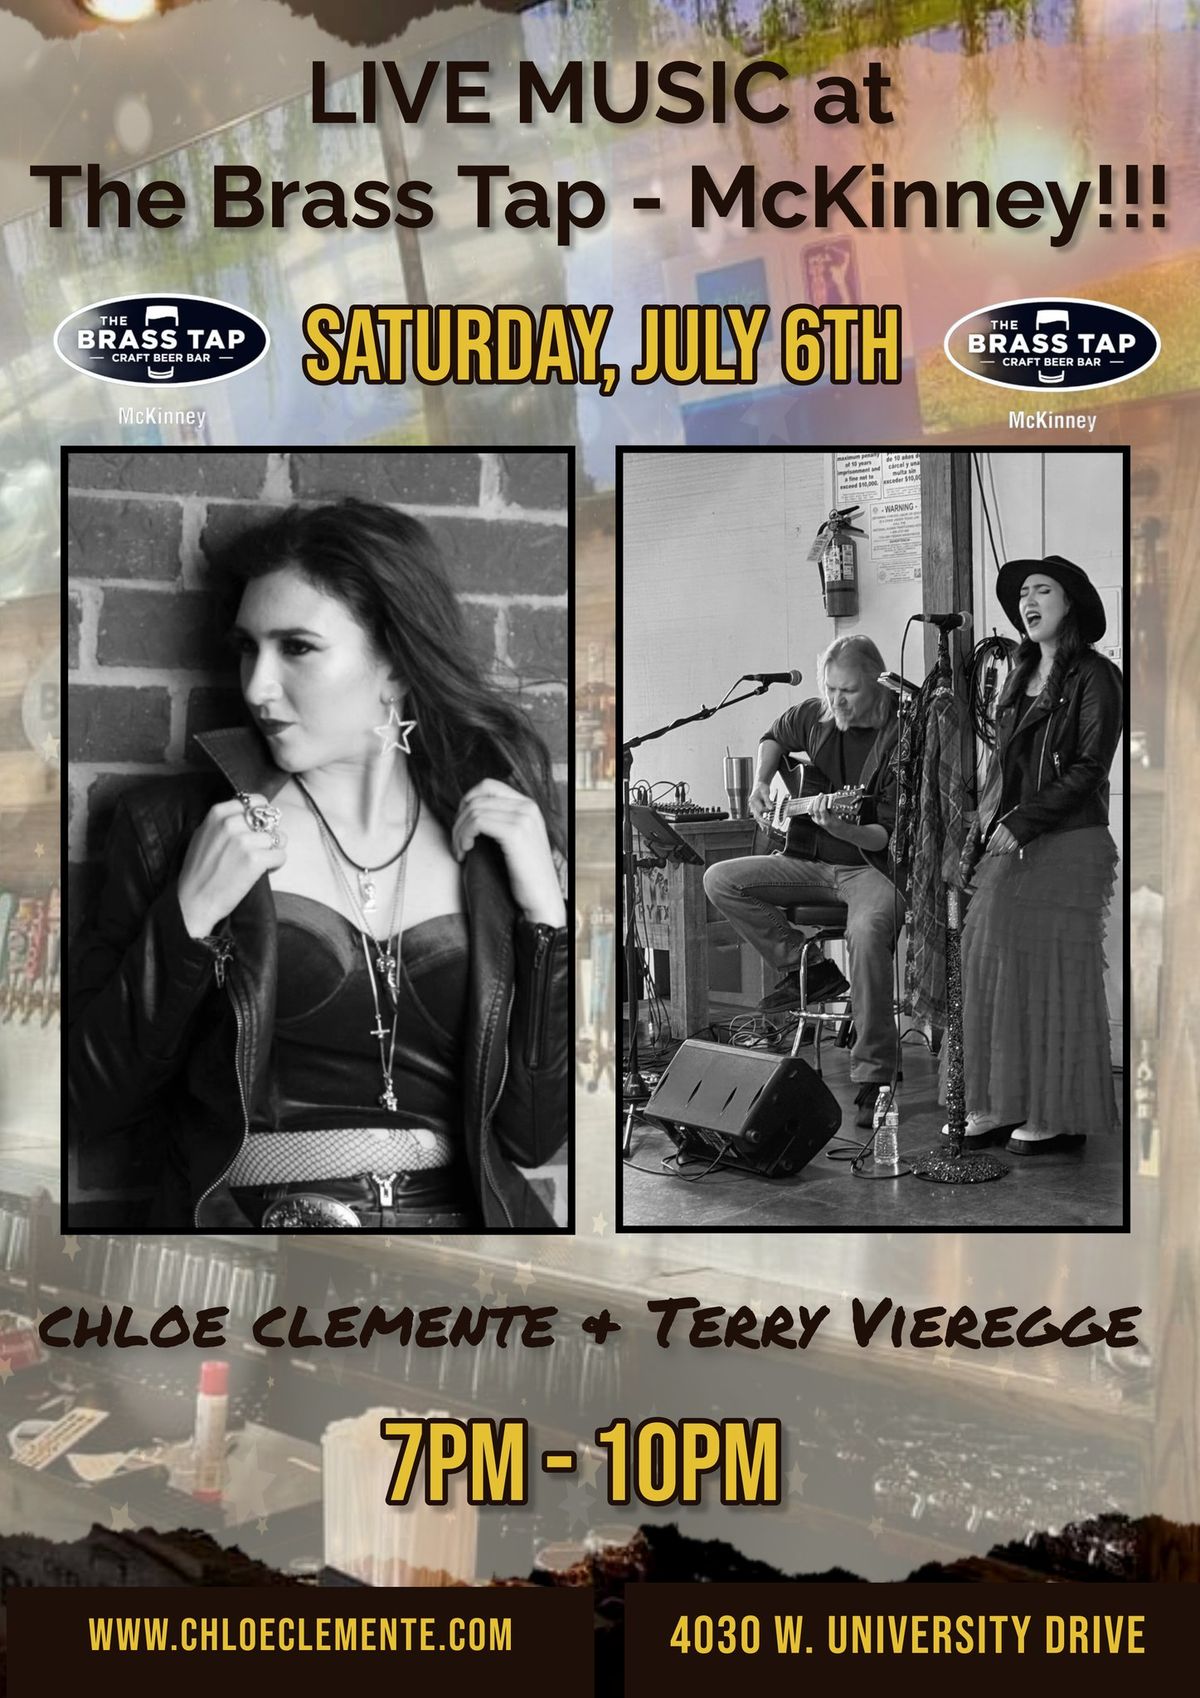 Chloe Clemente & Terry Vieregge LIVE at The Brass Tap - McKinney